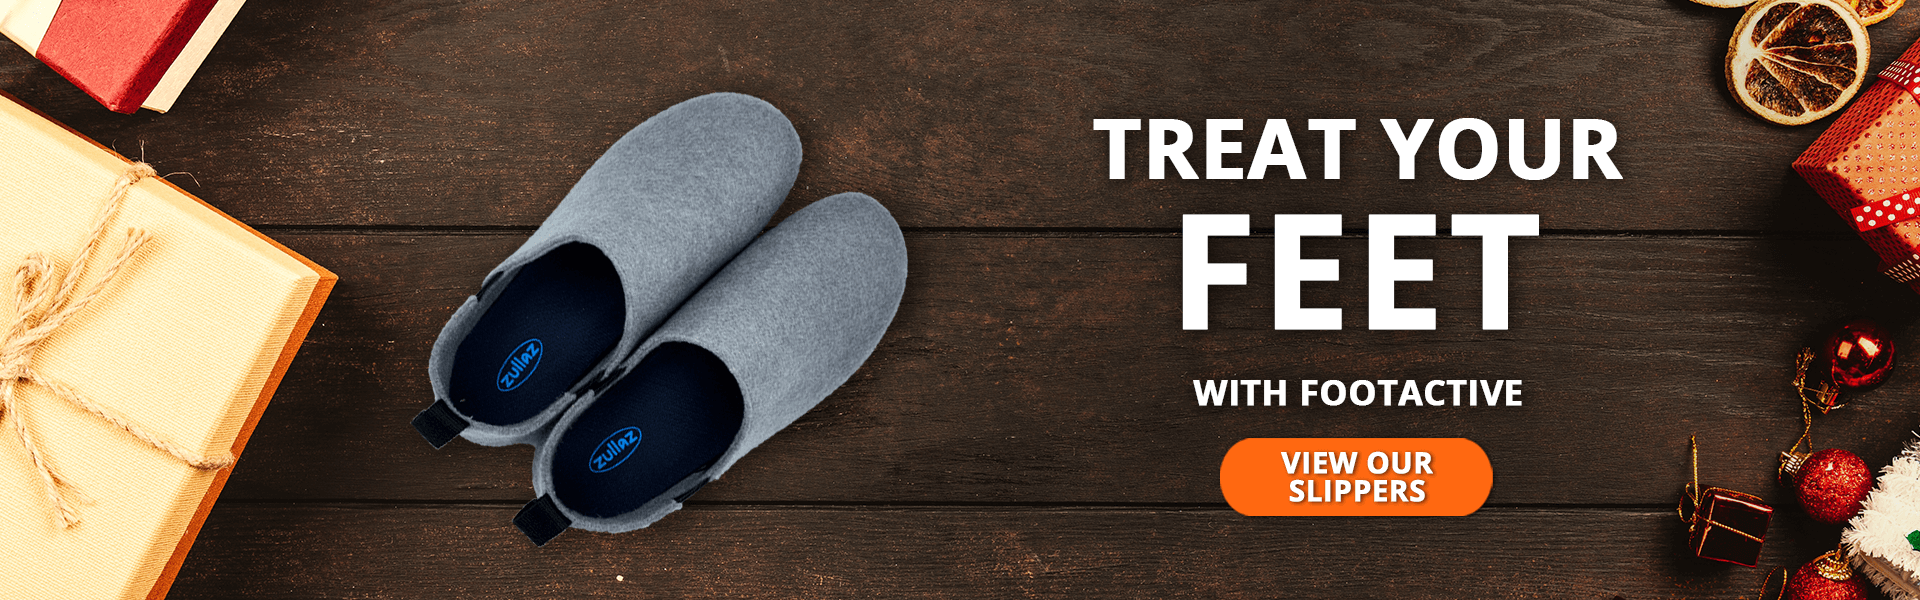 Treat your feet to arch support slippers!